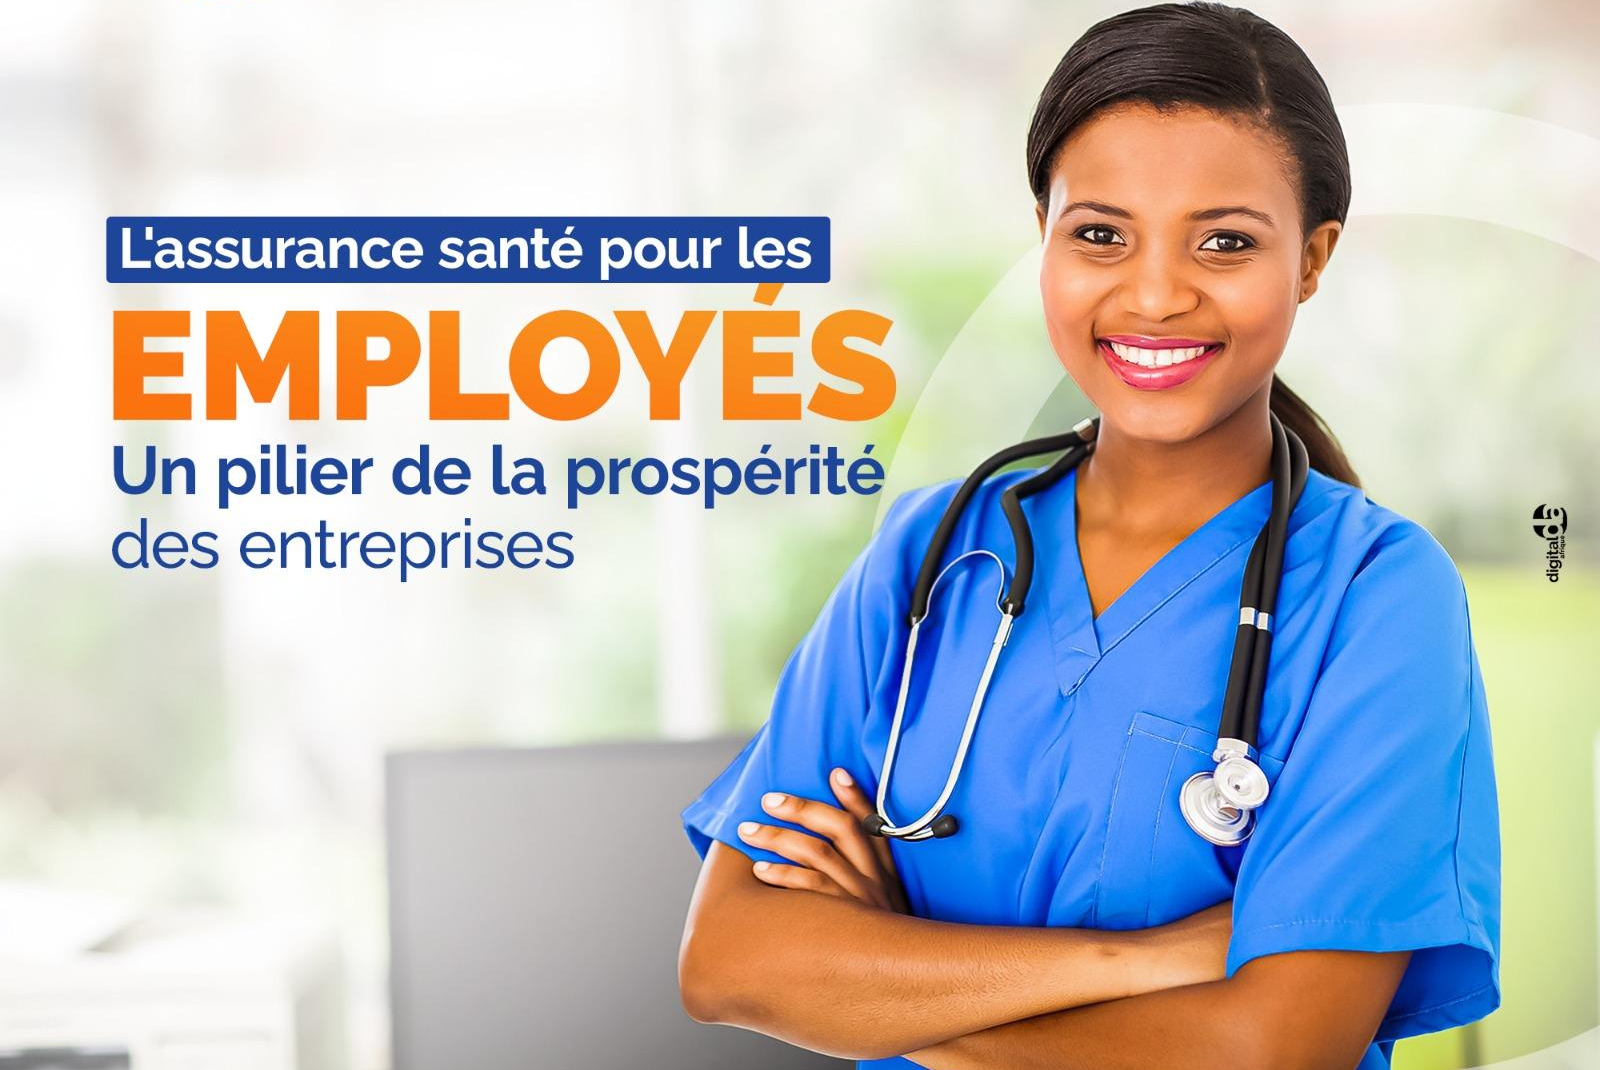 Health insurance for employees: A pillar of business prosperity